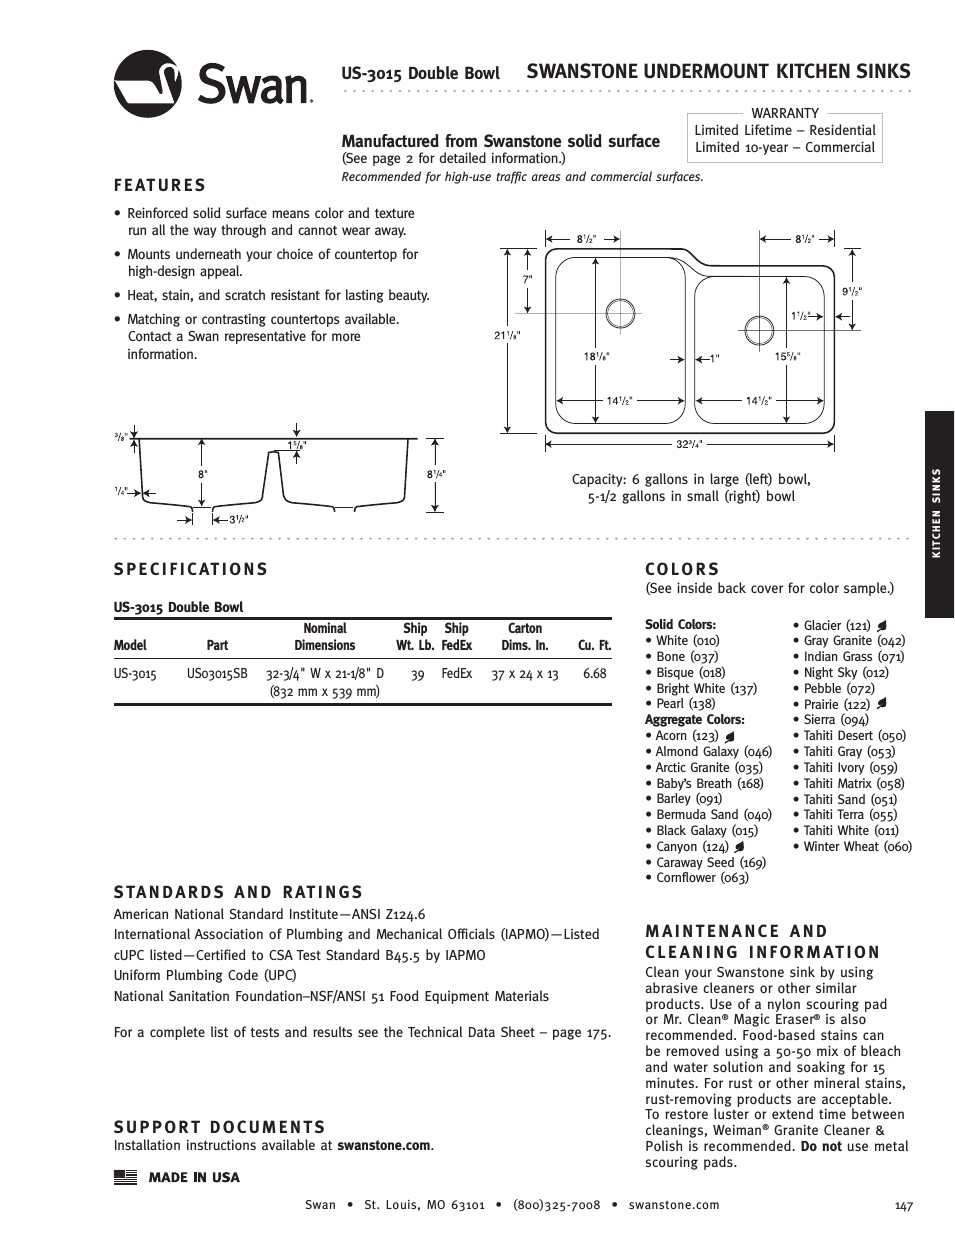 US-3015 - Specification